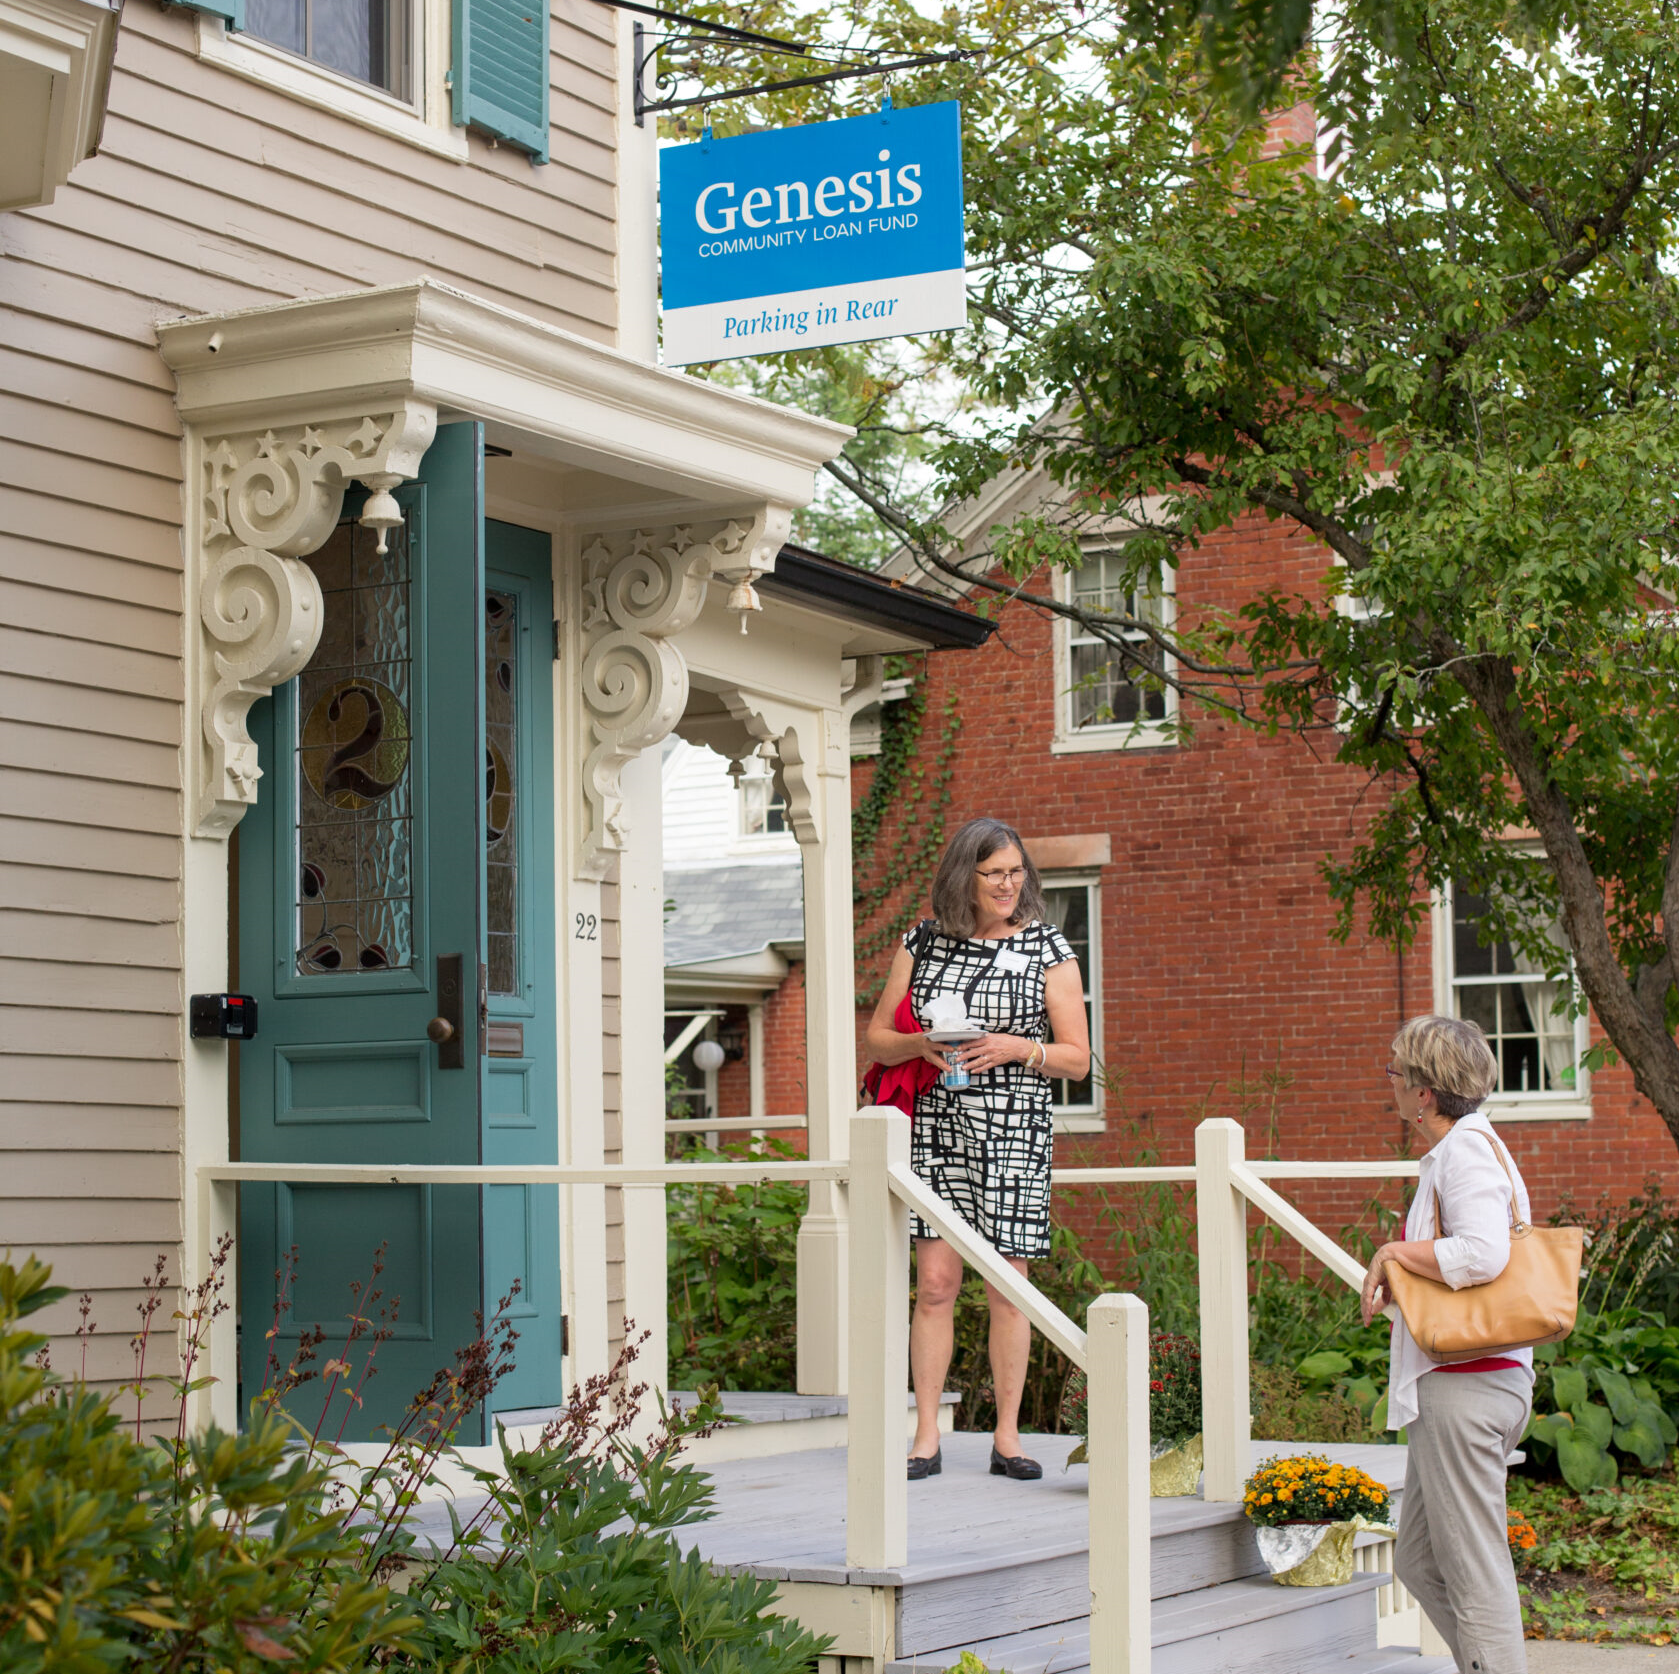 A person greets a visitor from the open doorway to the Genesis Fund's office at 22 Lincoln Street in Brunswick.